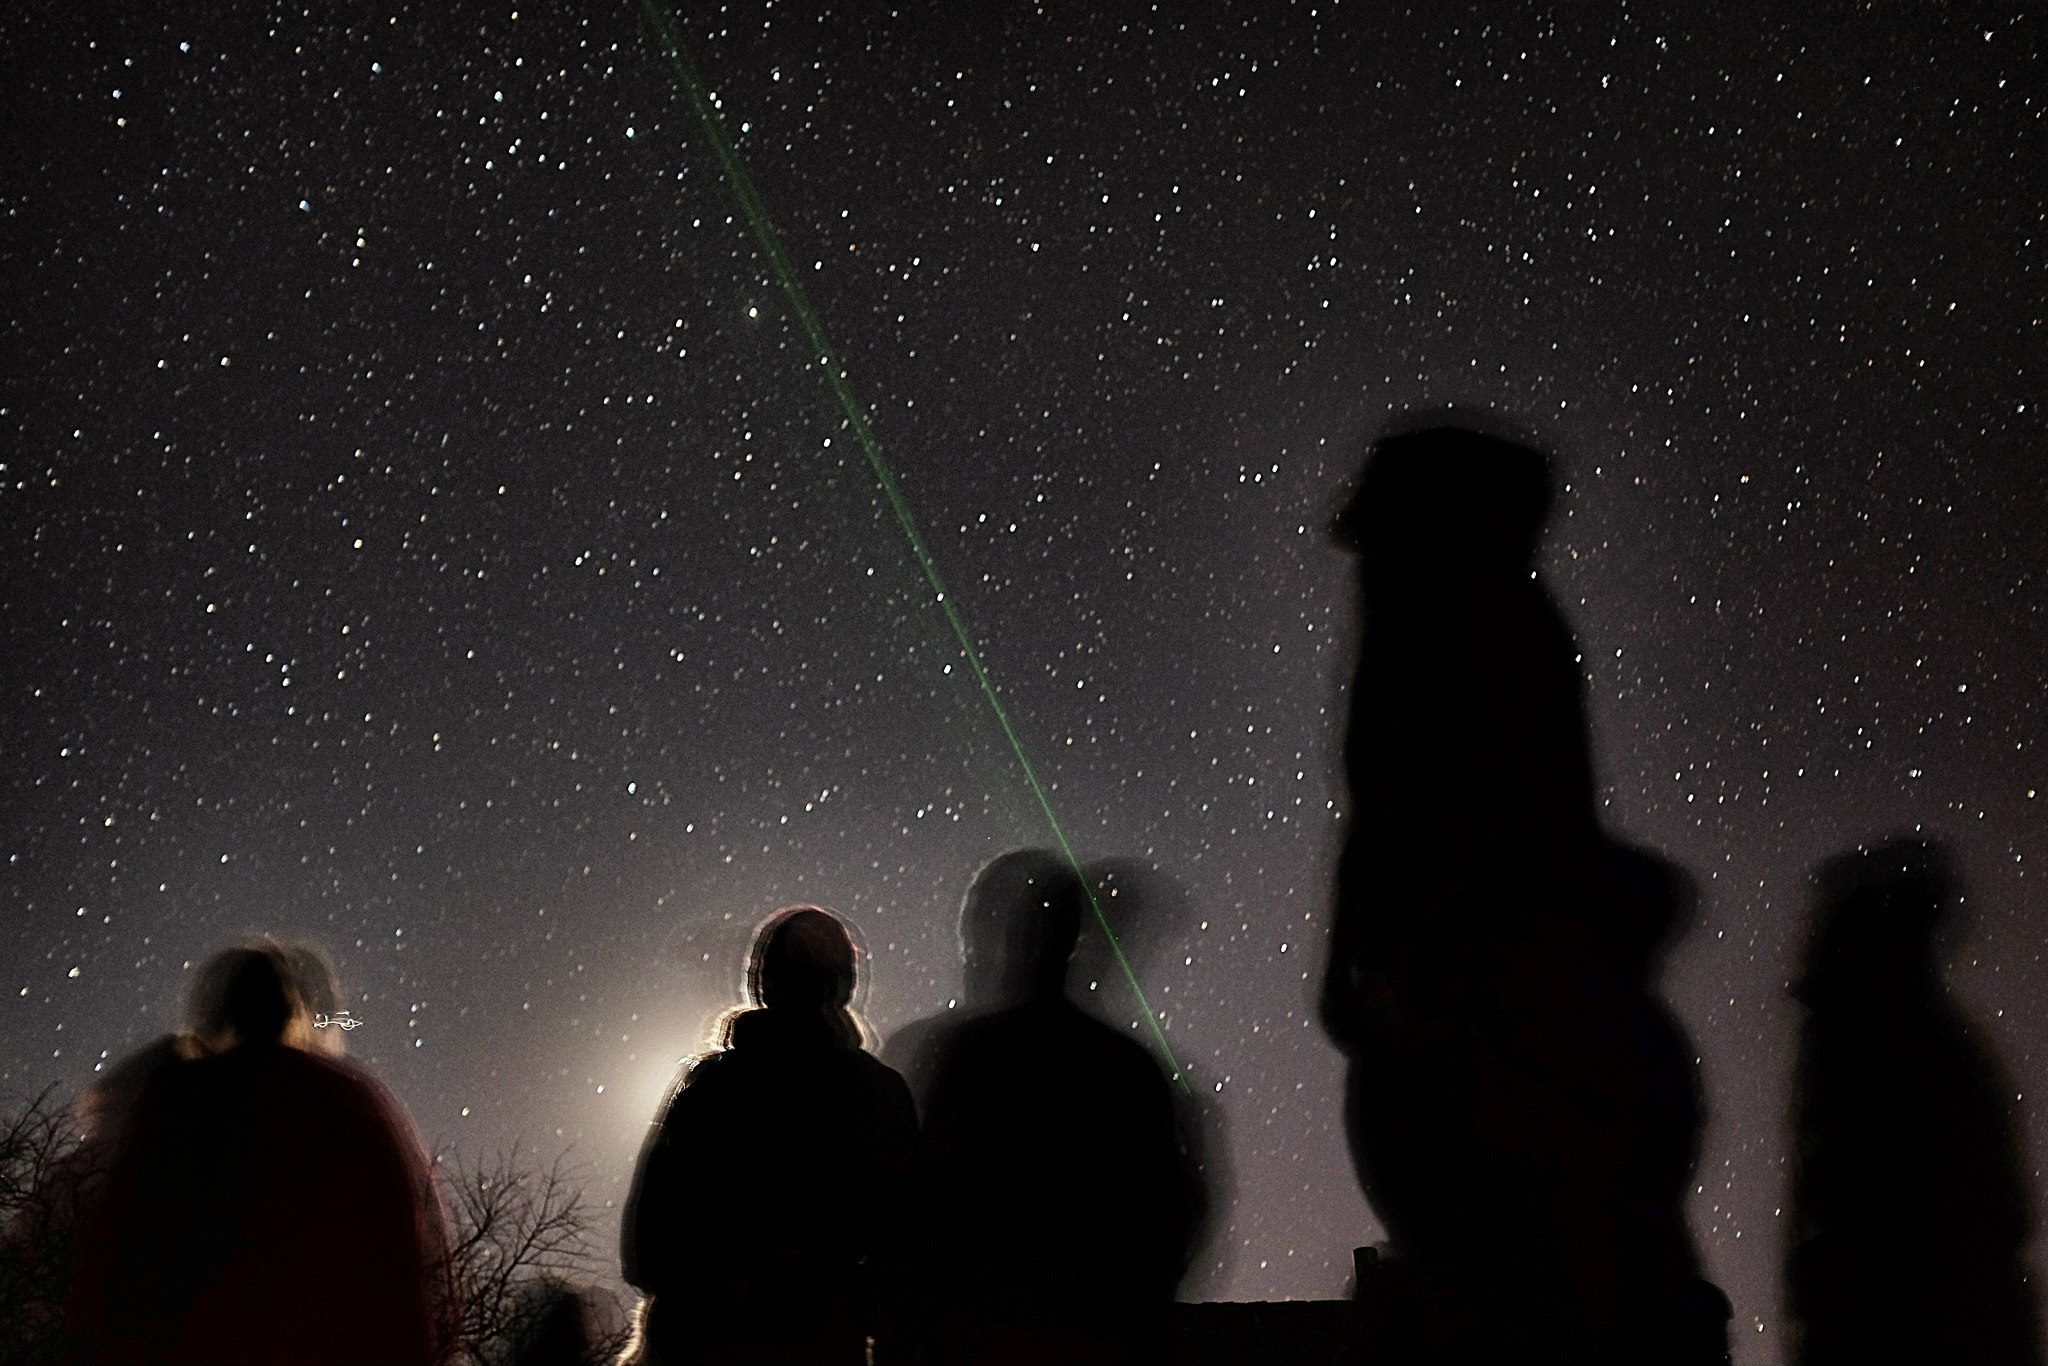 Following the Star Guide's Laser Pointer